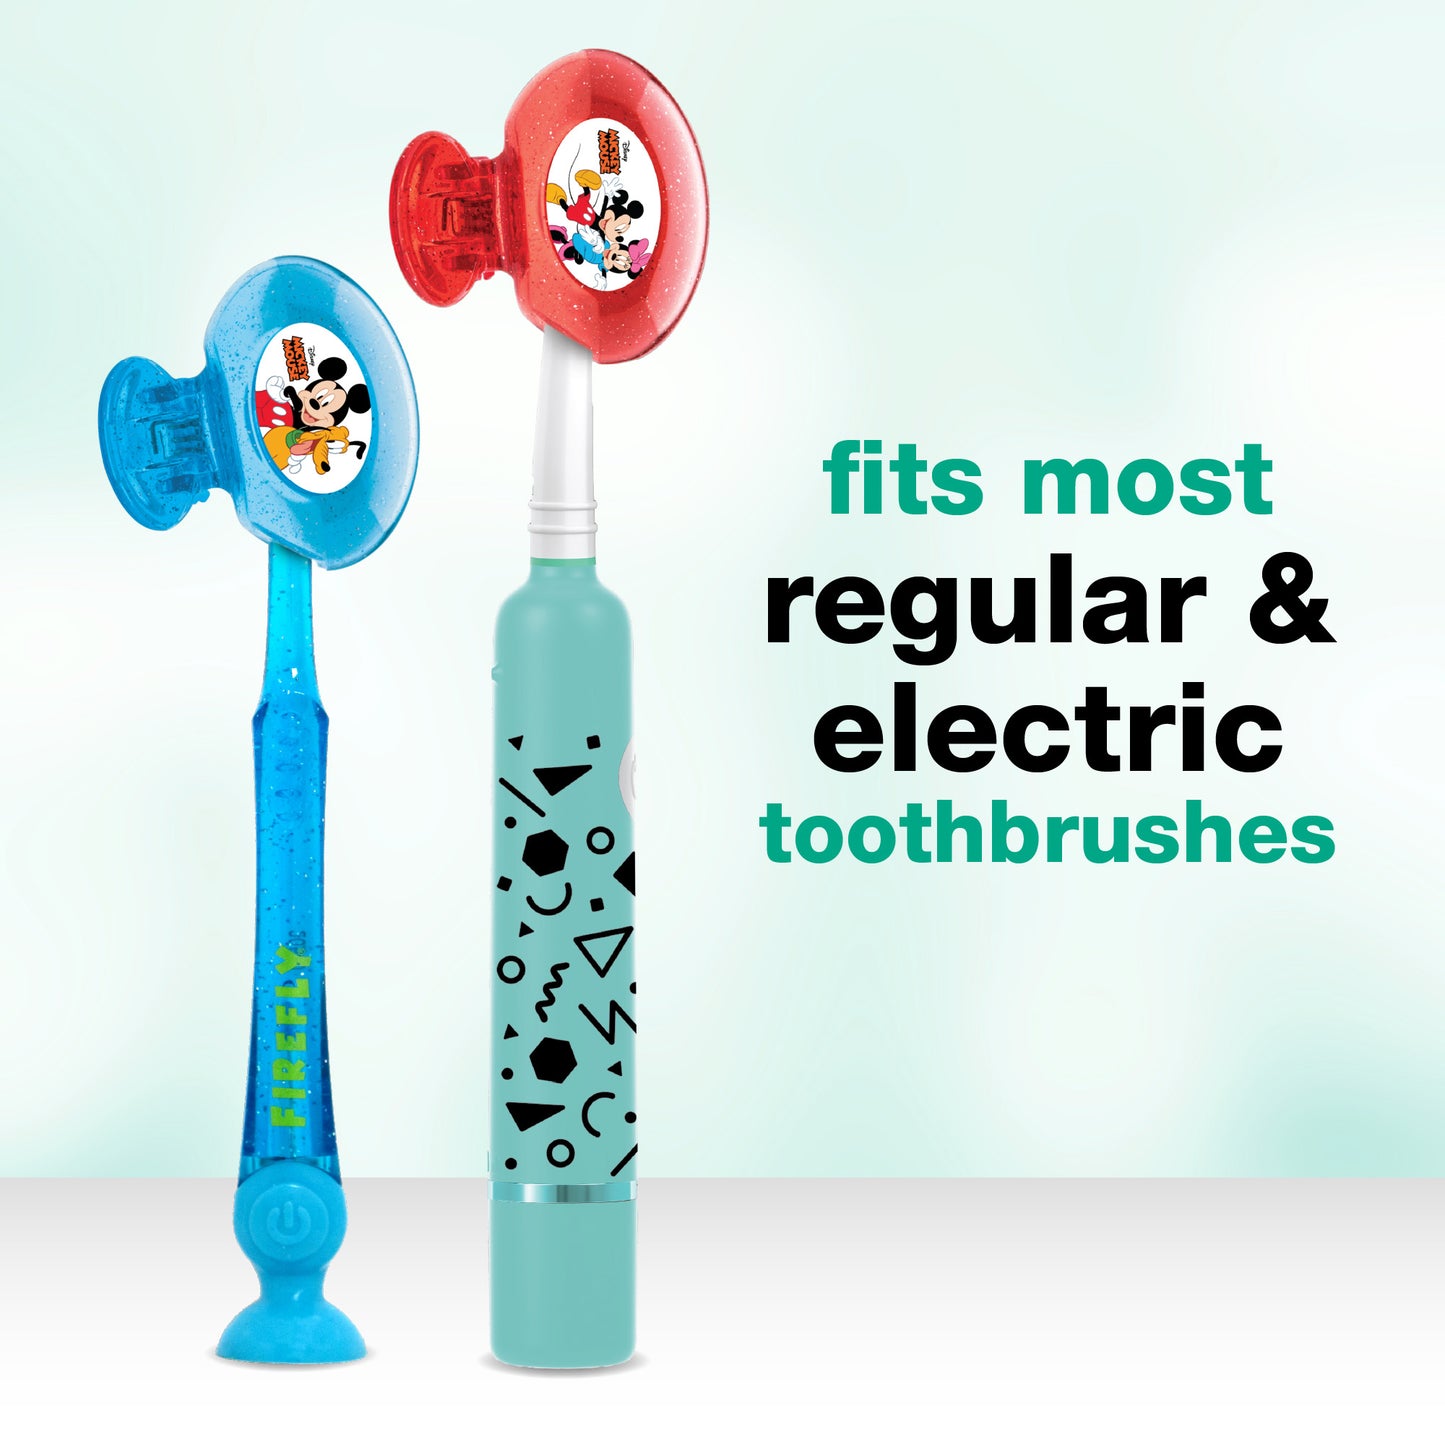 
                  
                    Steripod Kids Mickey Mouse Clip-On Toothbrush Protector, Strawberry Scent, Blue and Red Steripods clipped to 2 toothbrushes, fits regular & electric toothbrushes
                  
                